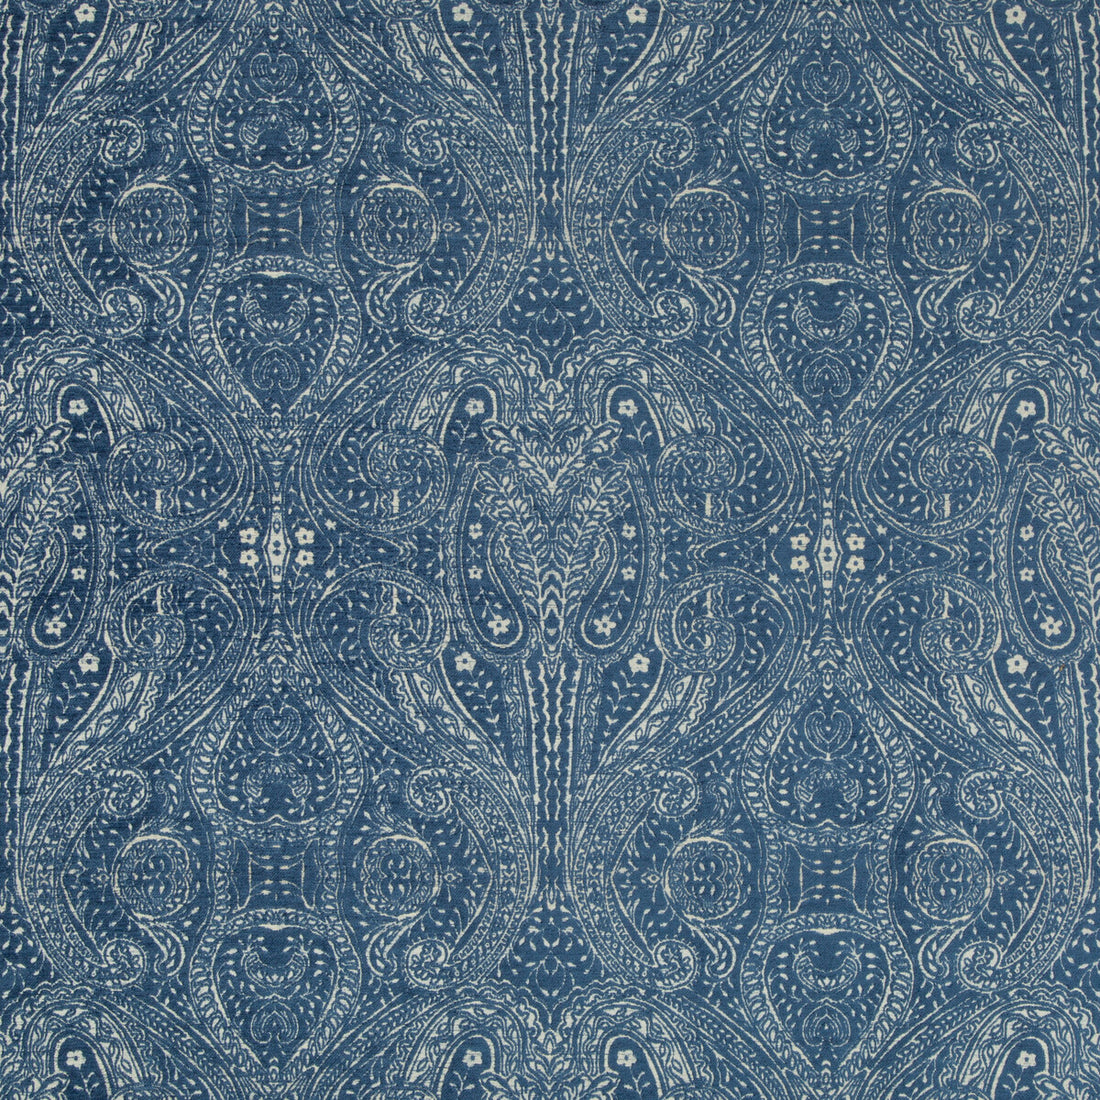 Kravet Design fabric in 35007-505 color - pattern 35007.505.0 - by Kravet Design in the Performance Crypton Home collection